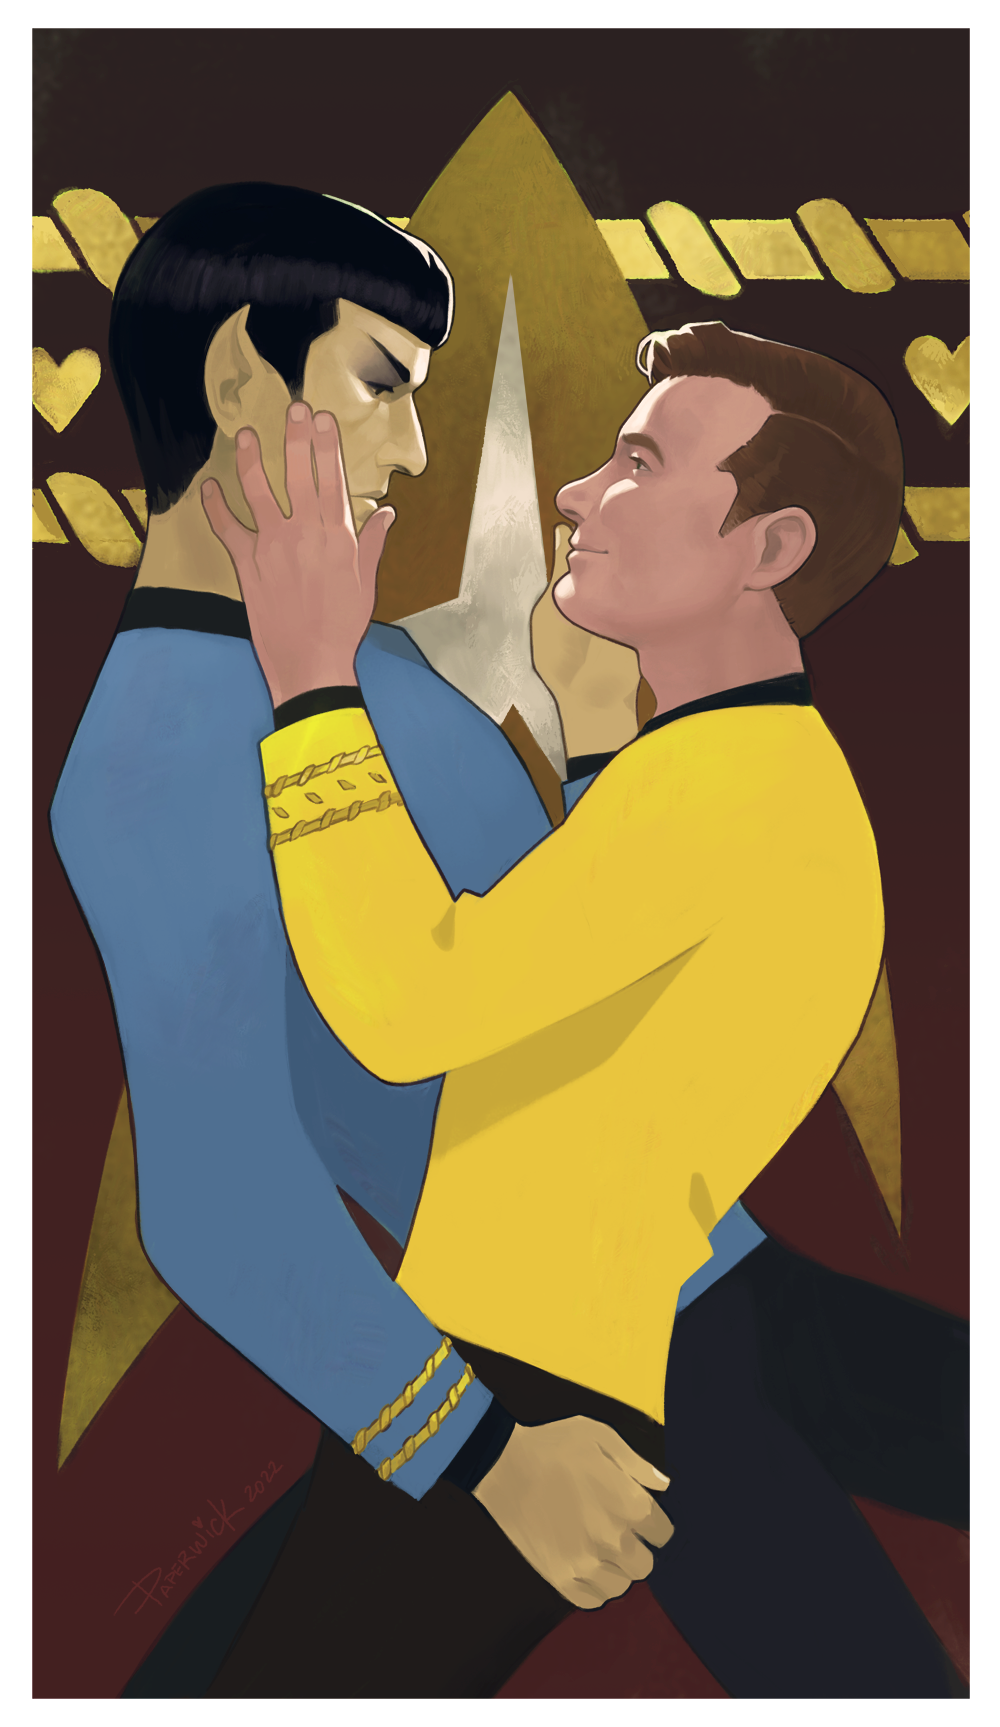 kirk and spock 2022